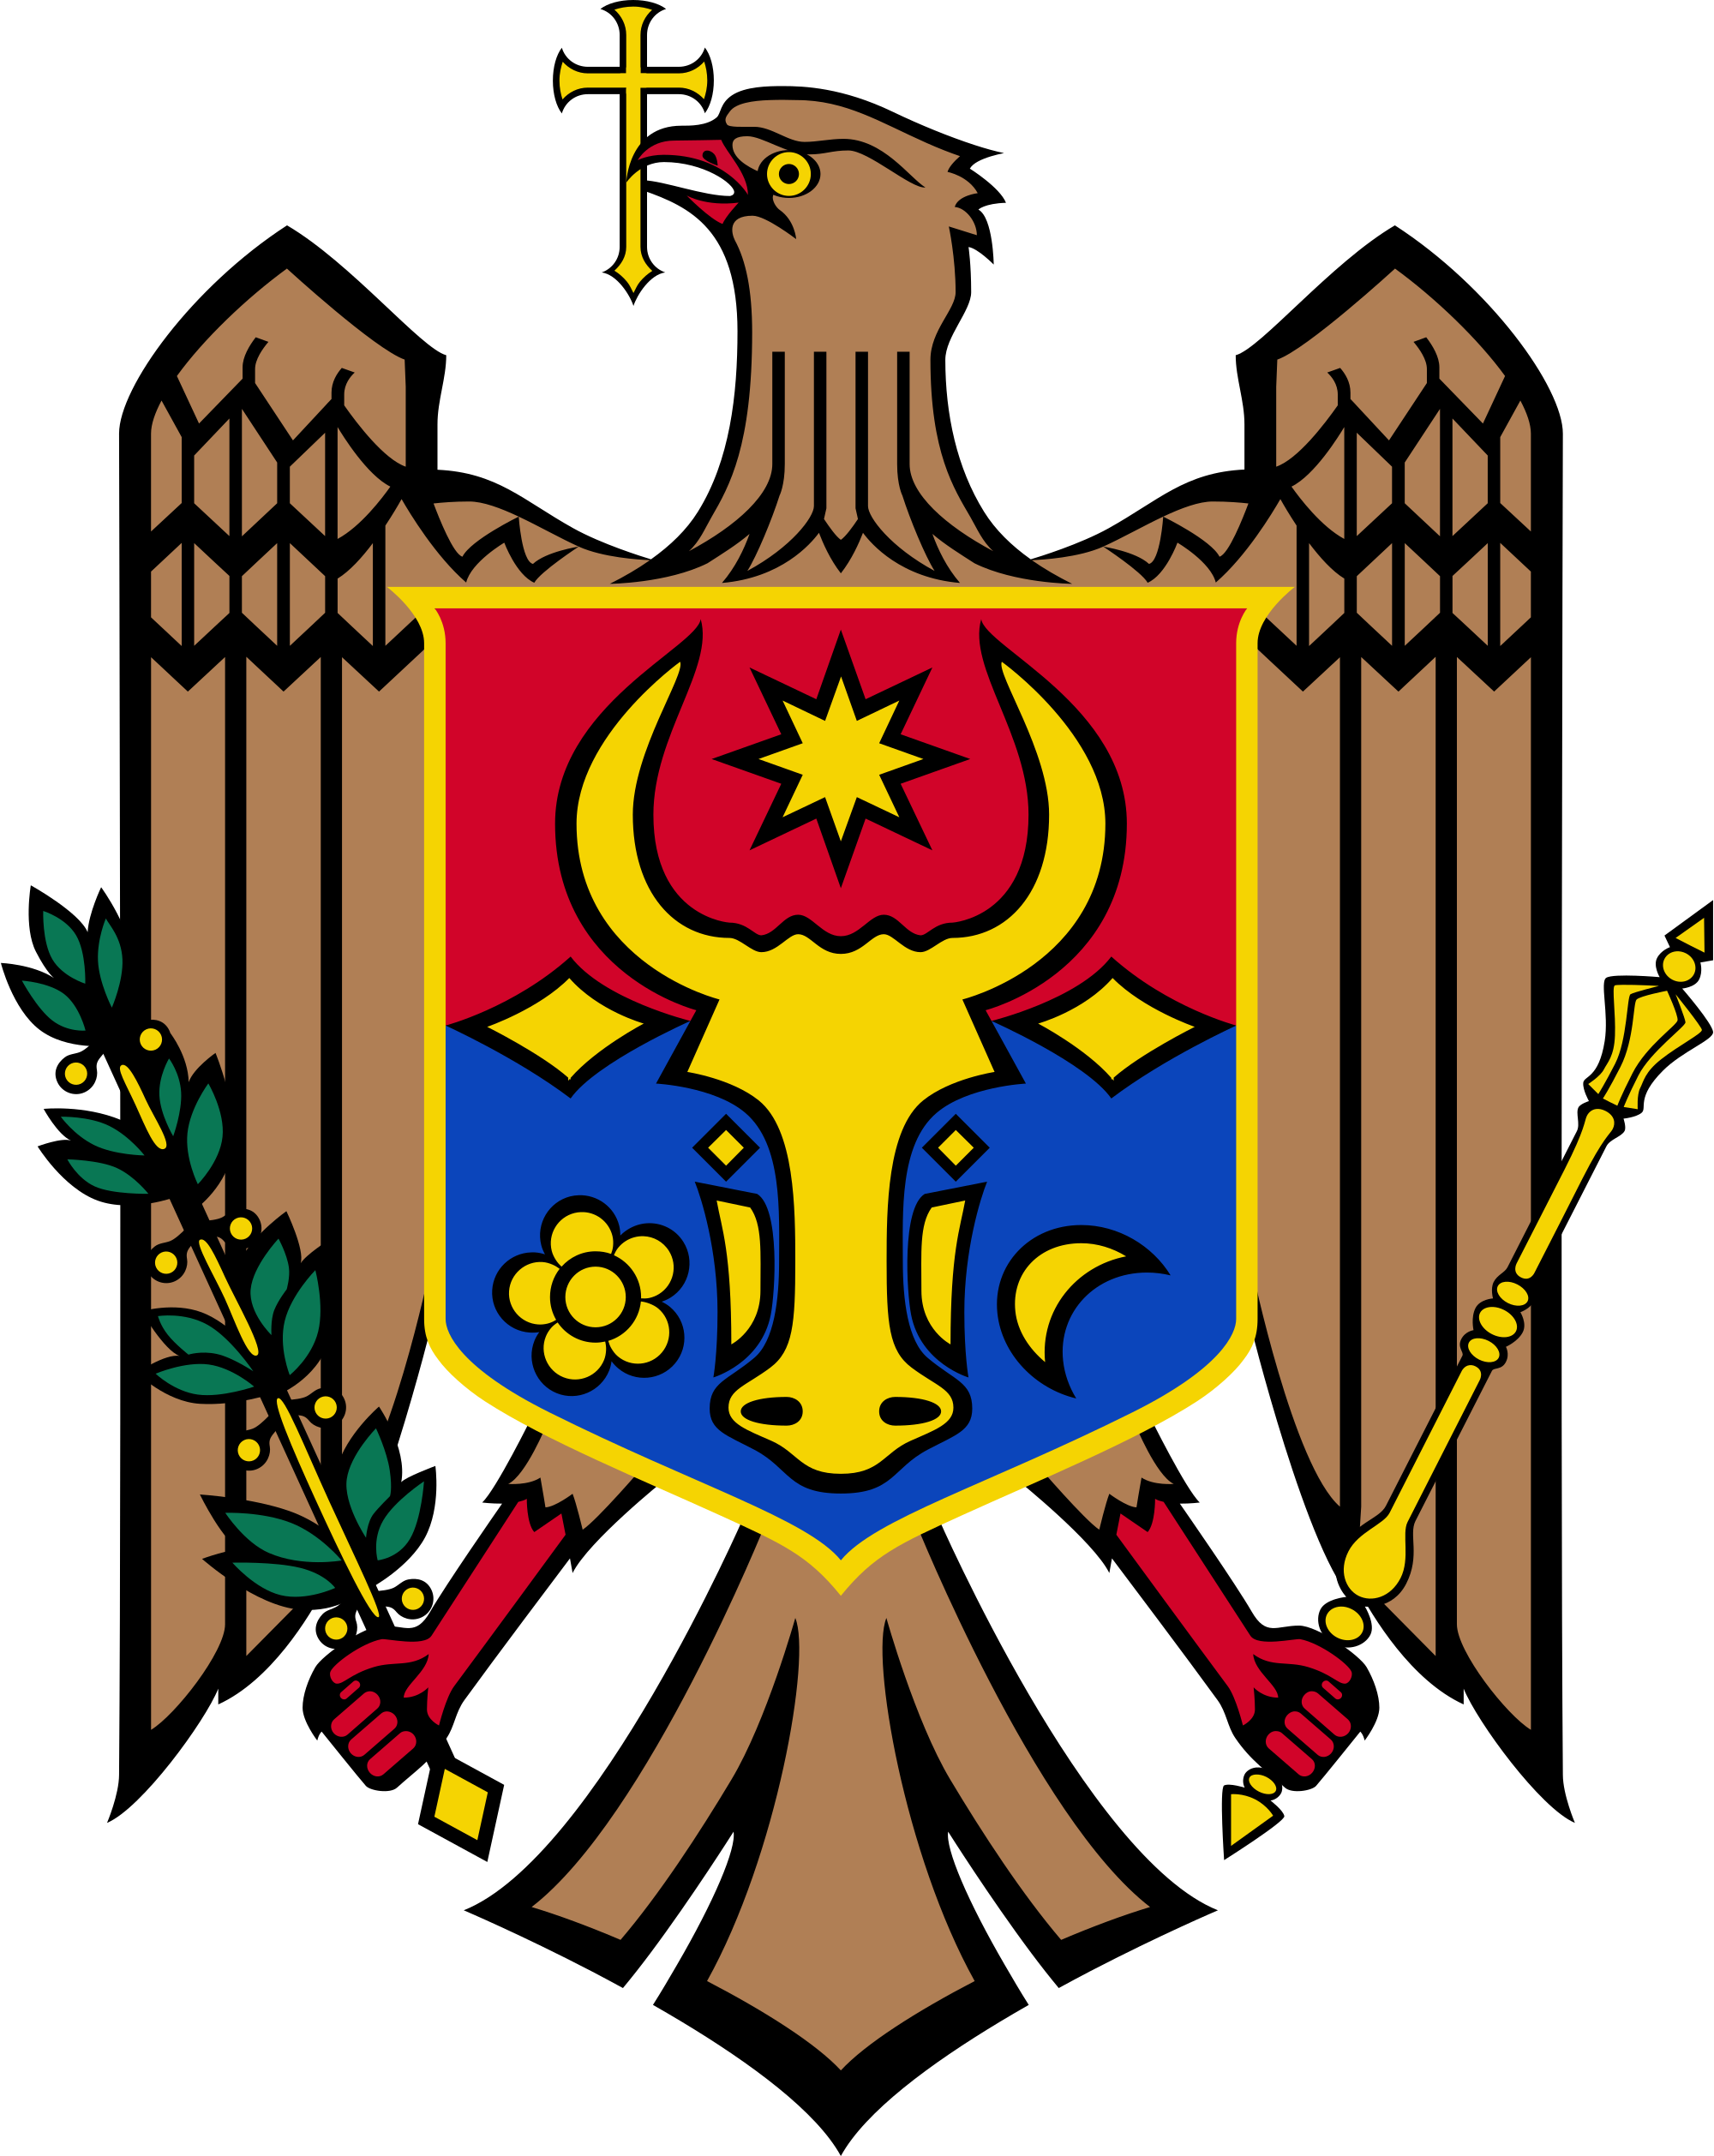 A Colorful Emblem With A Bull Head And A Shield